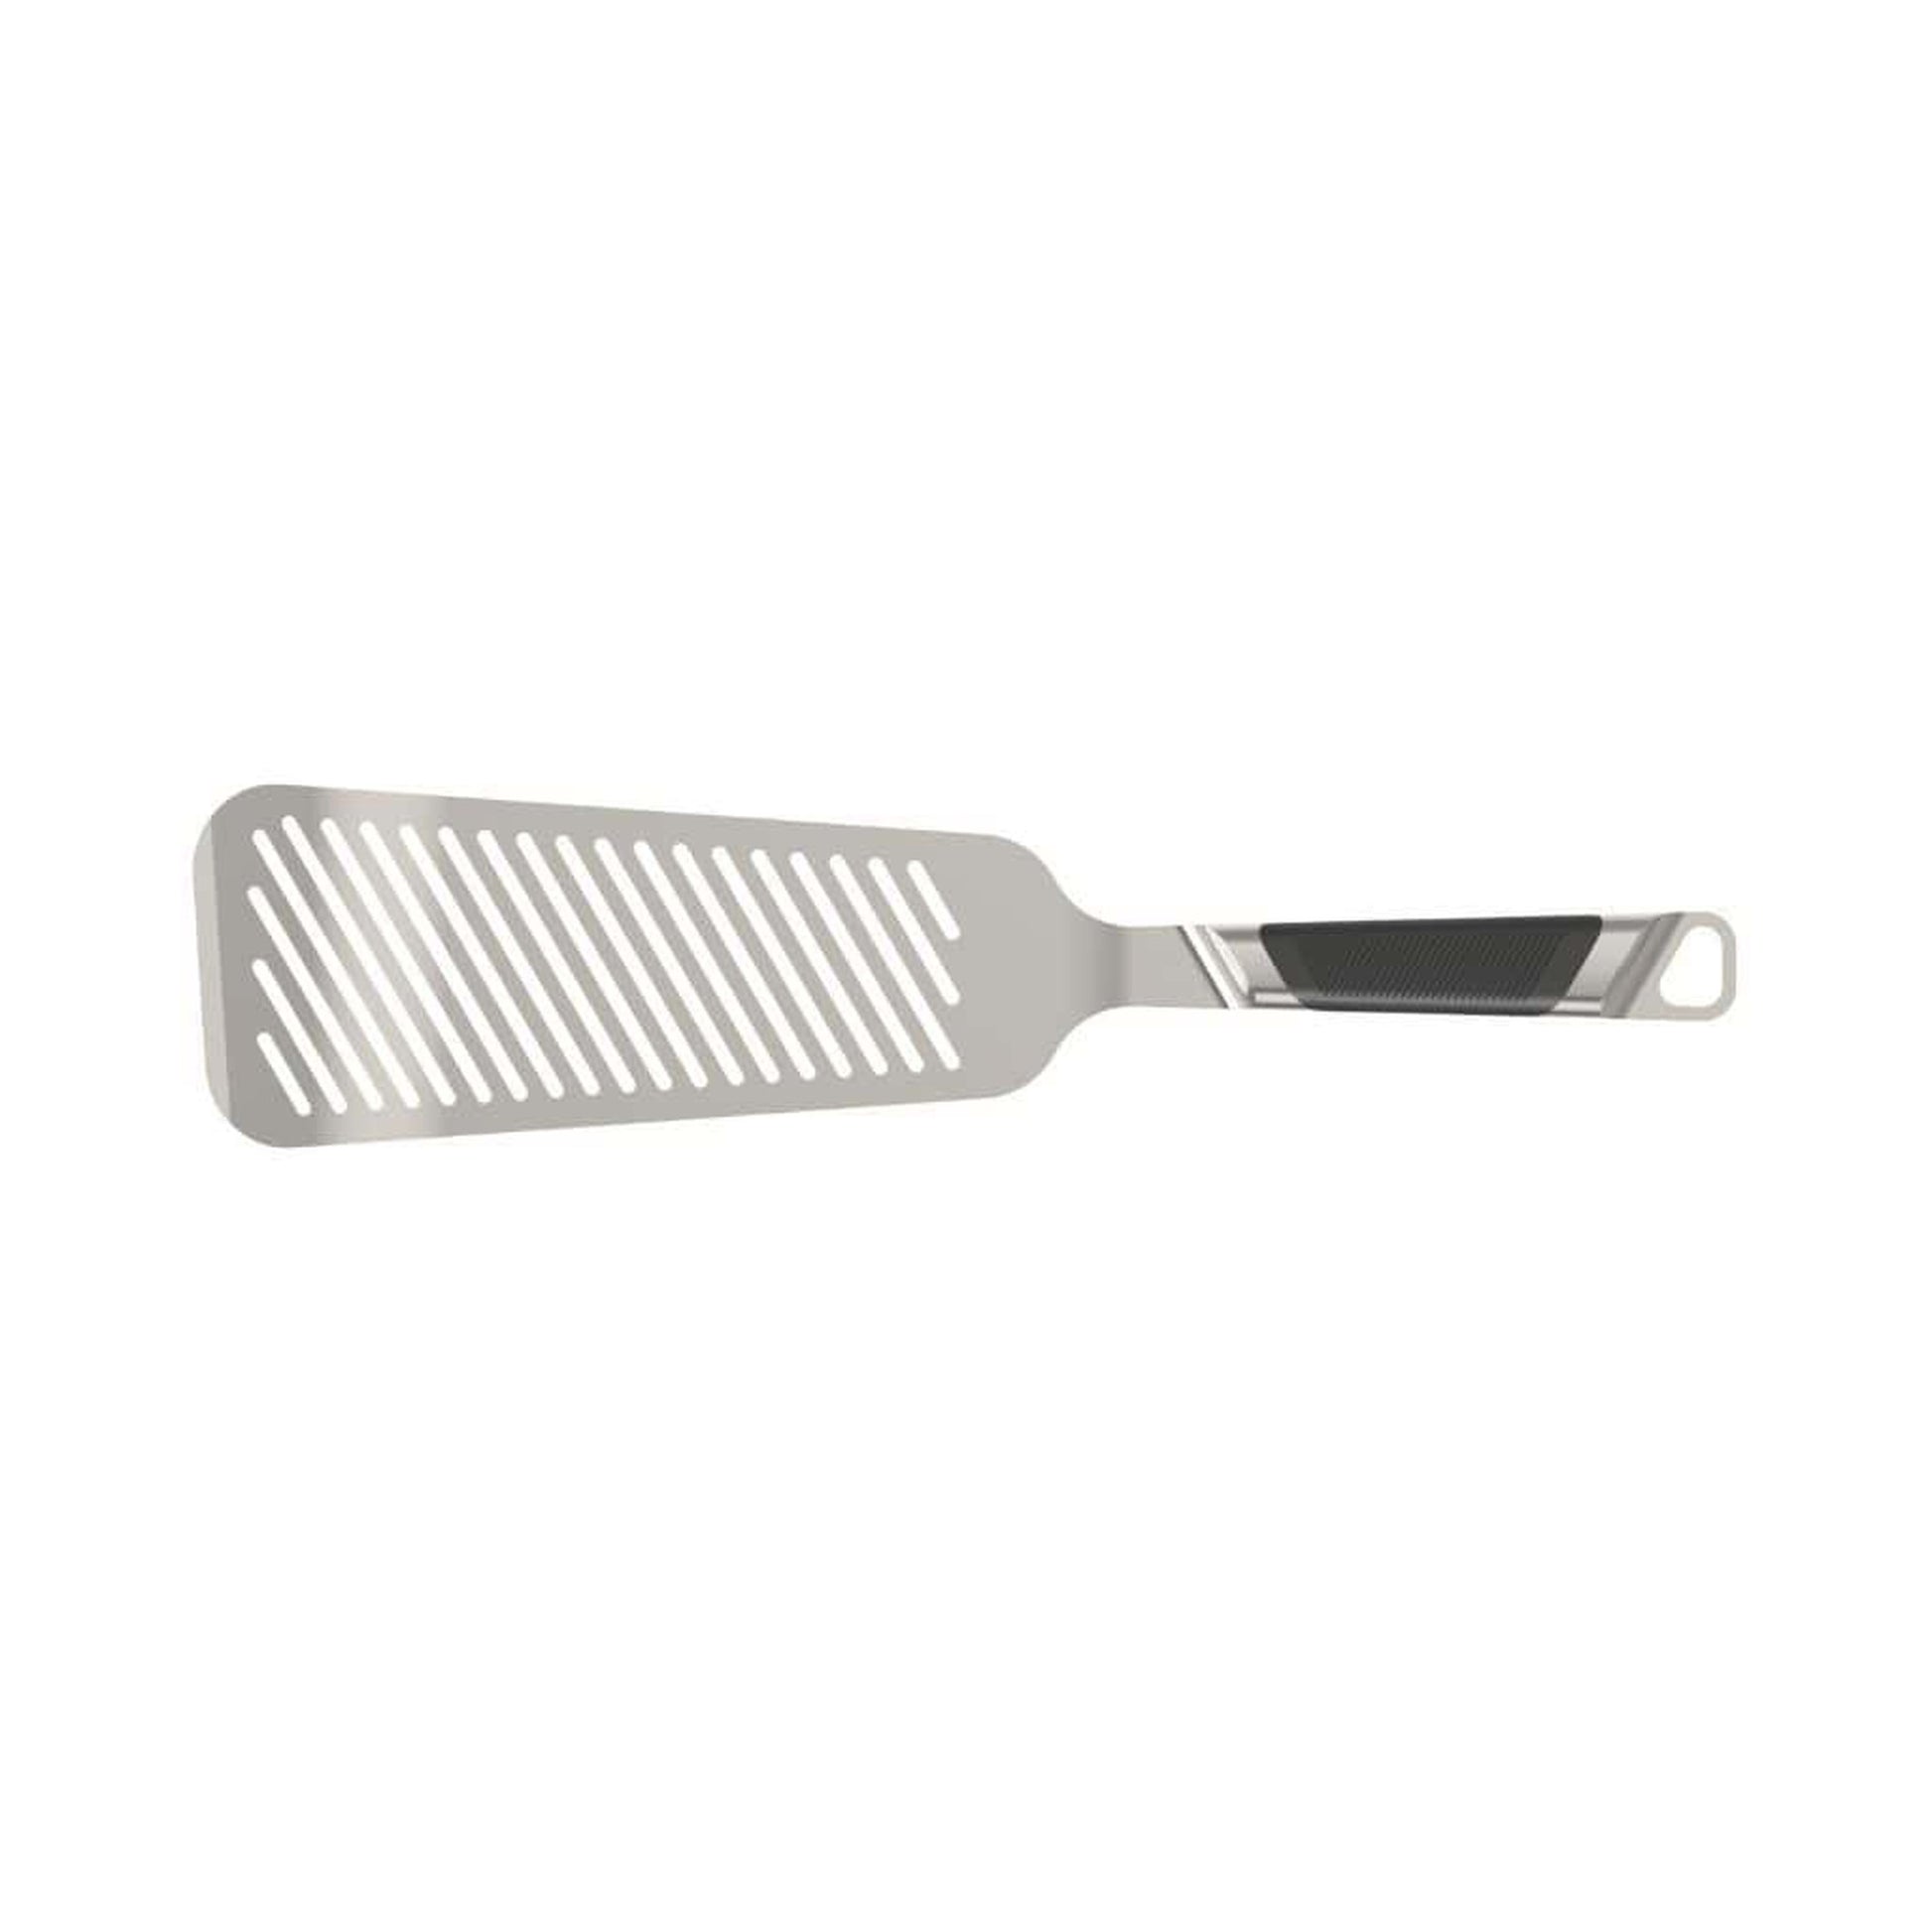 Everdure Large Premium Stainless Steel Fish Turner with Soft Grip